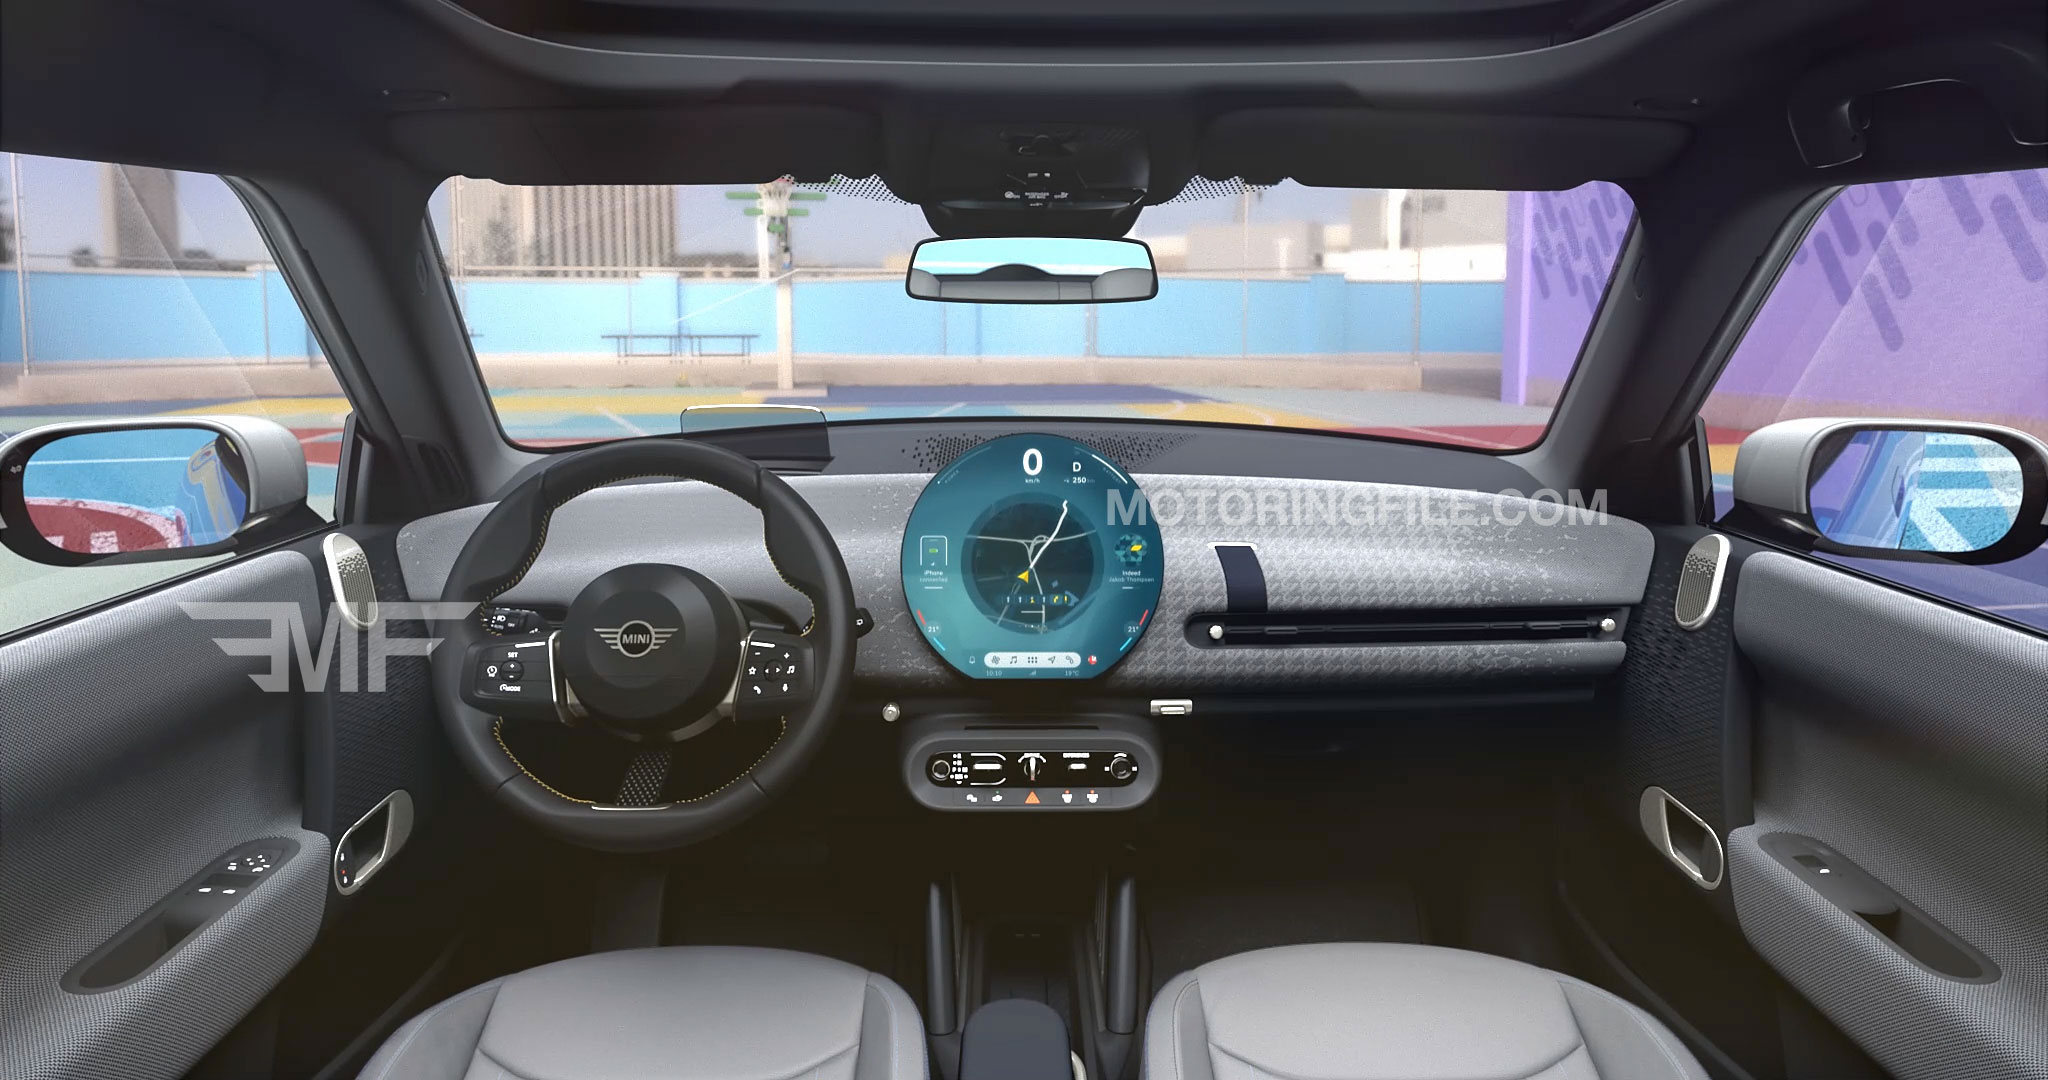 Video: Hands-On With The 2024 MINI Cooper Electric Interior